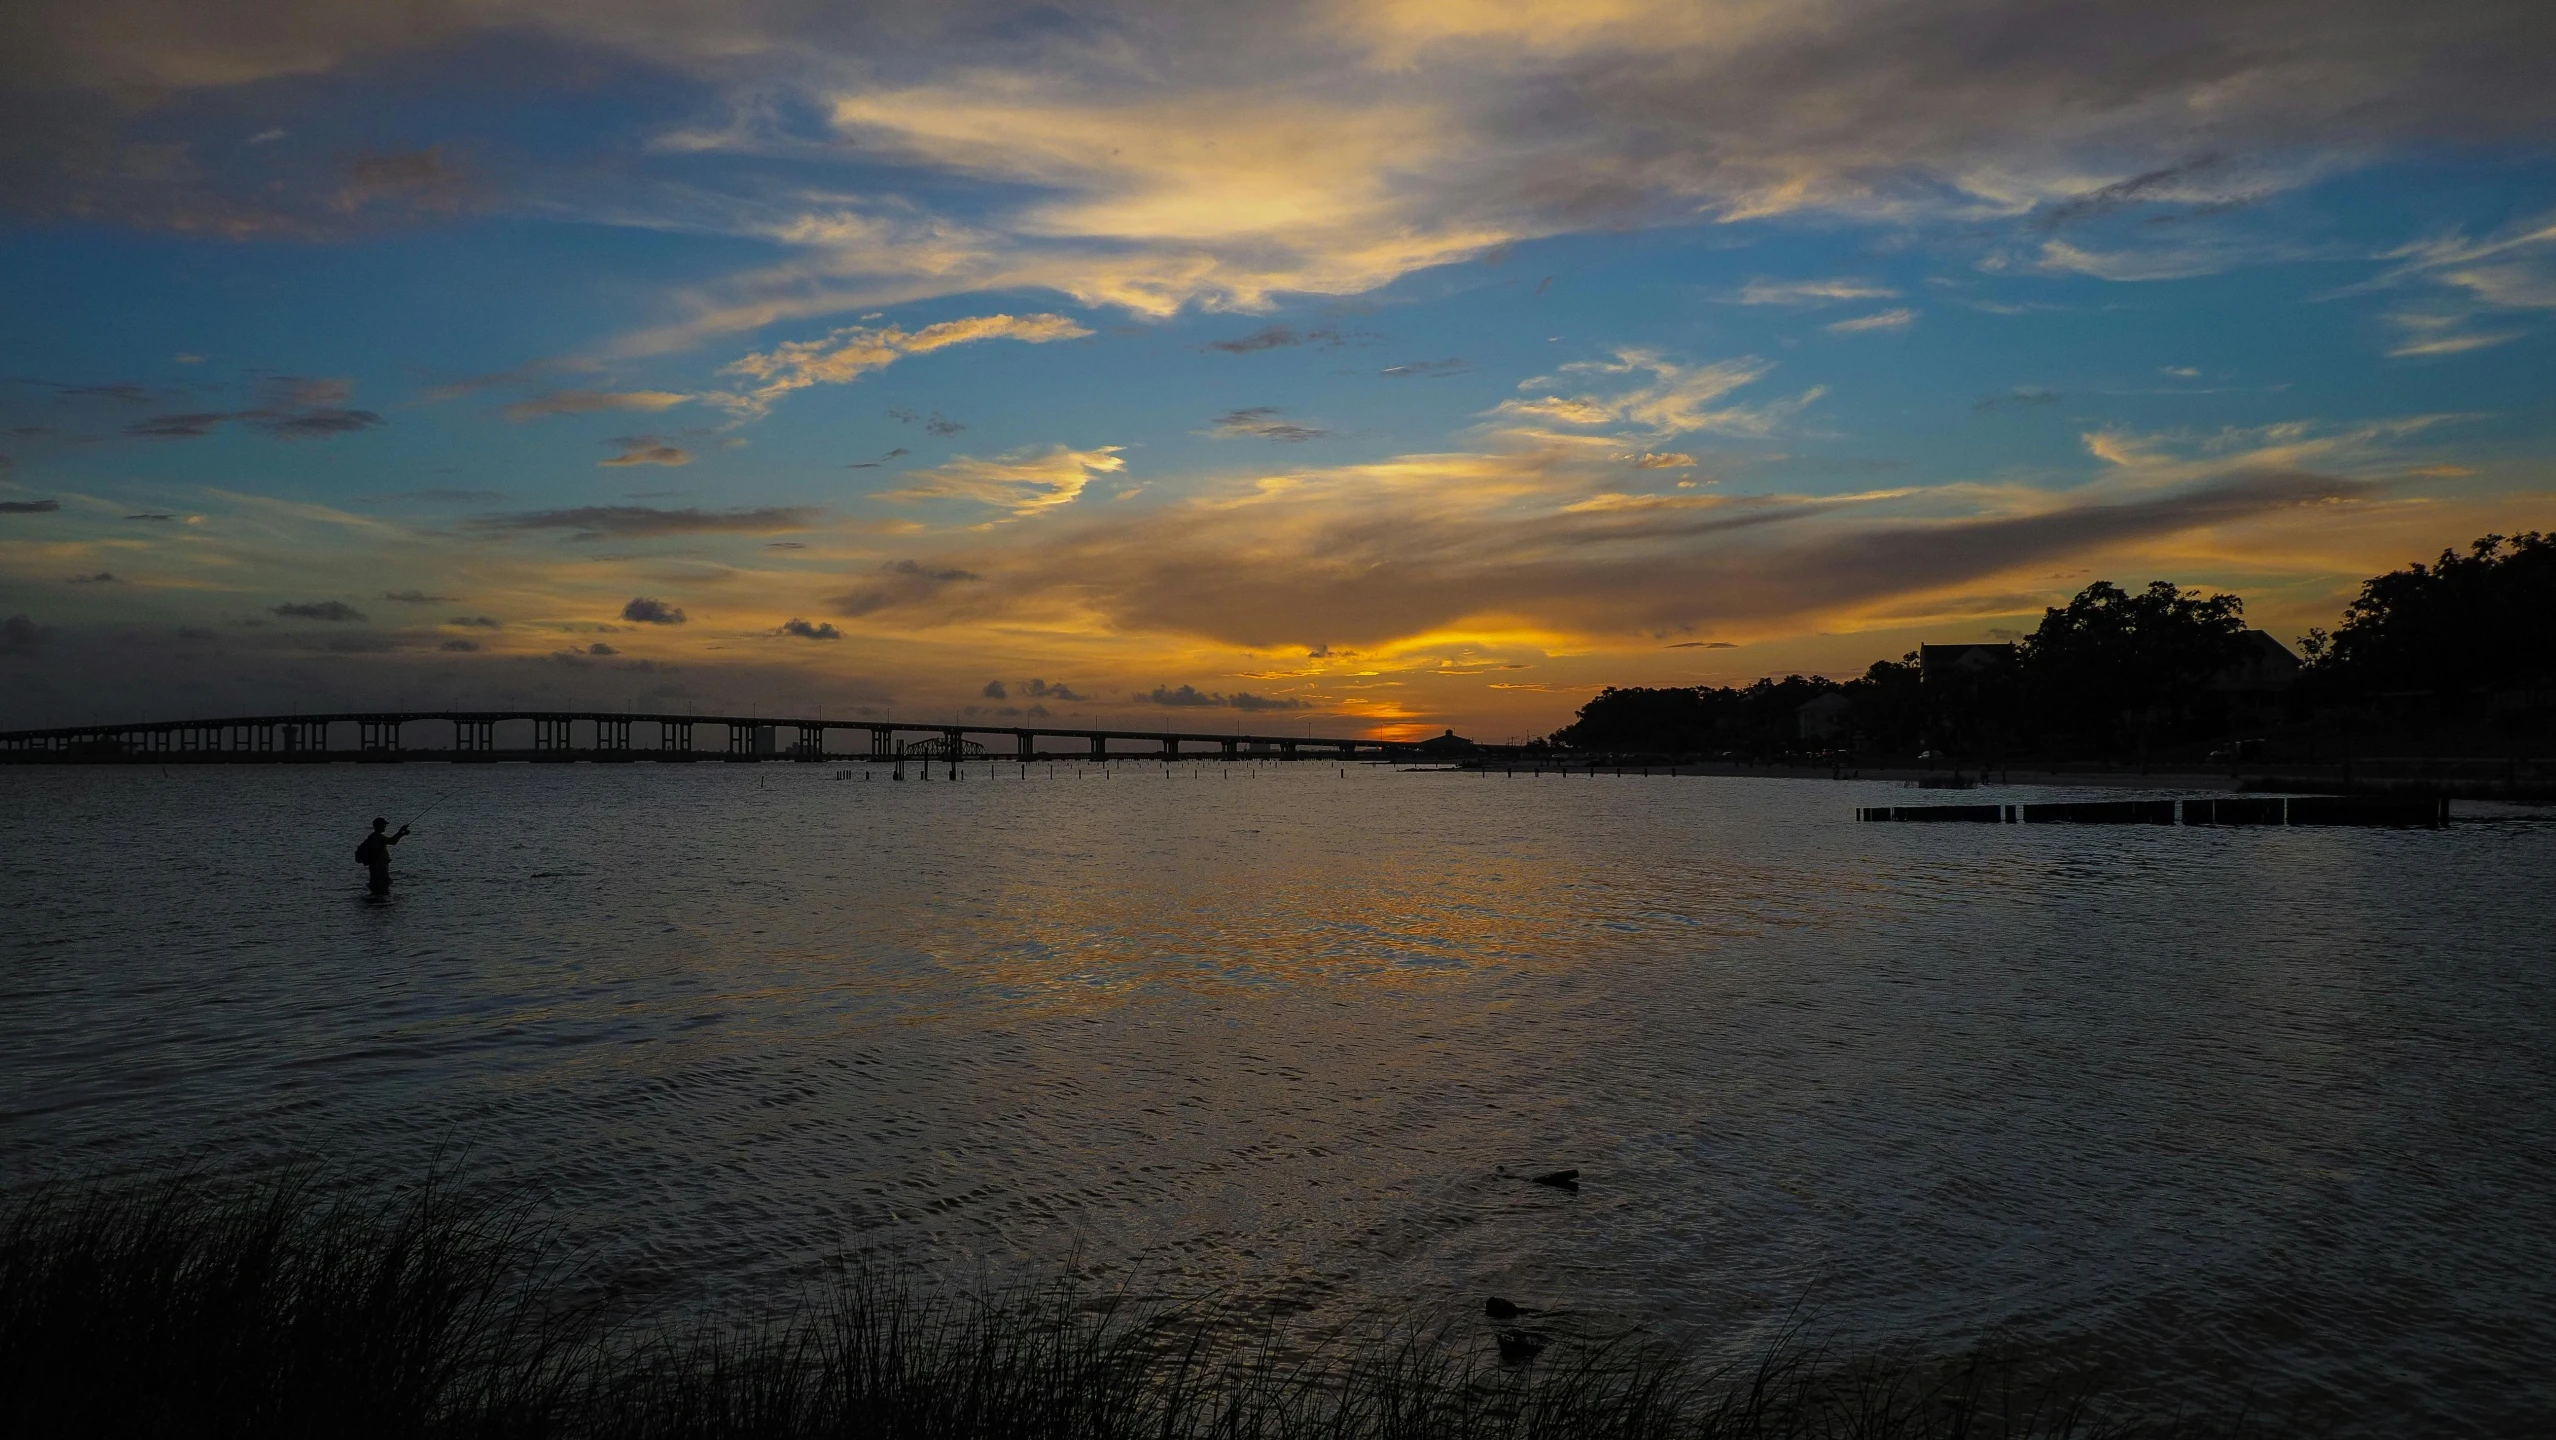 a sunset over a body of water with a bridge in the distance, profile image